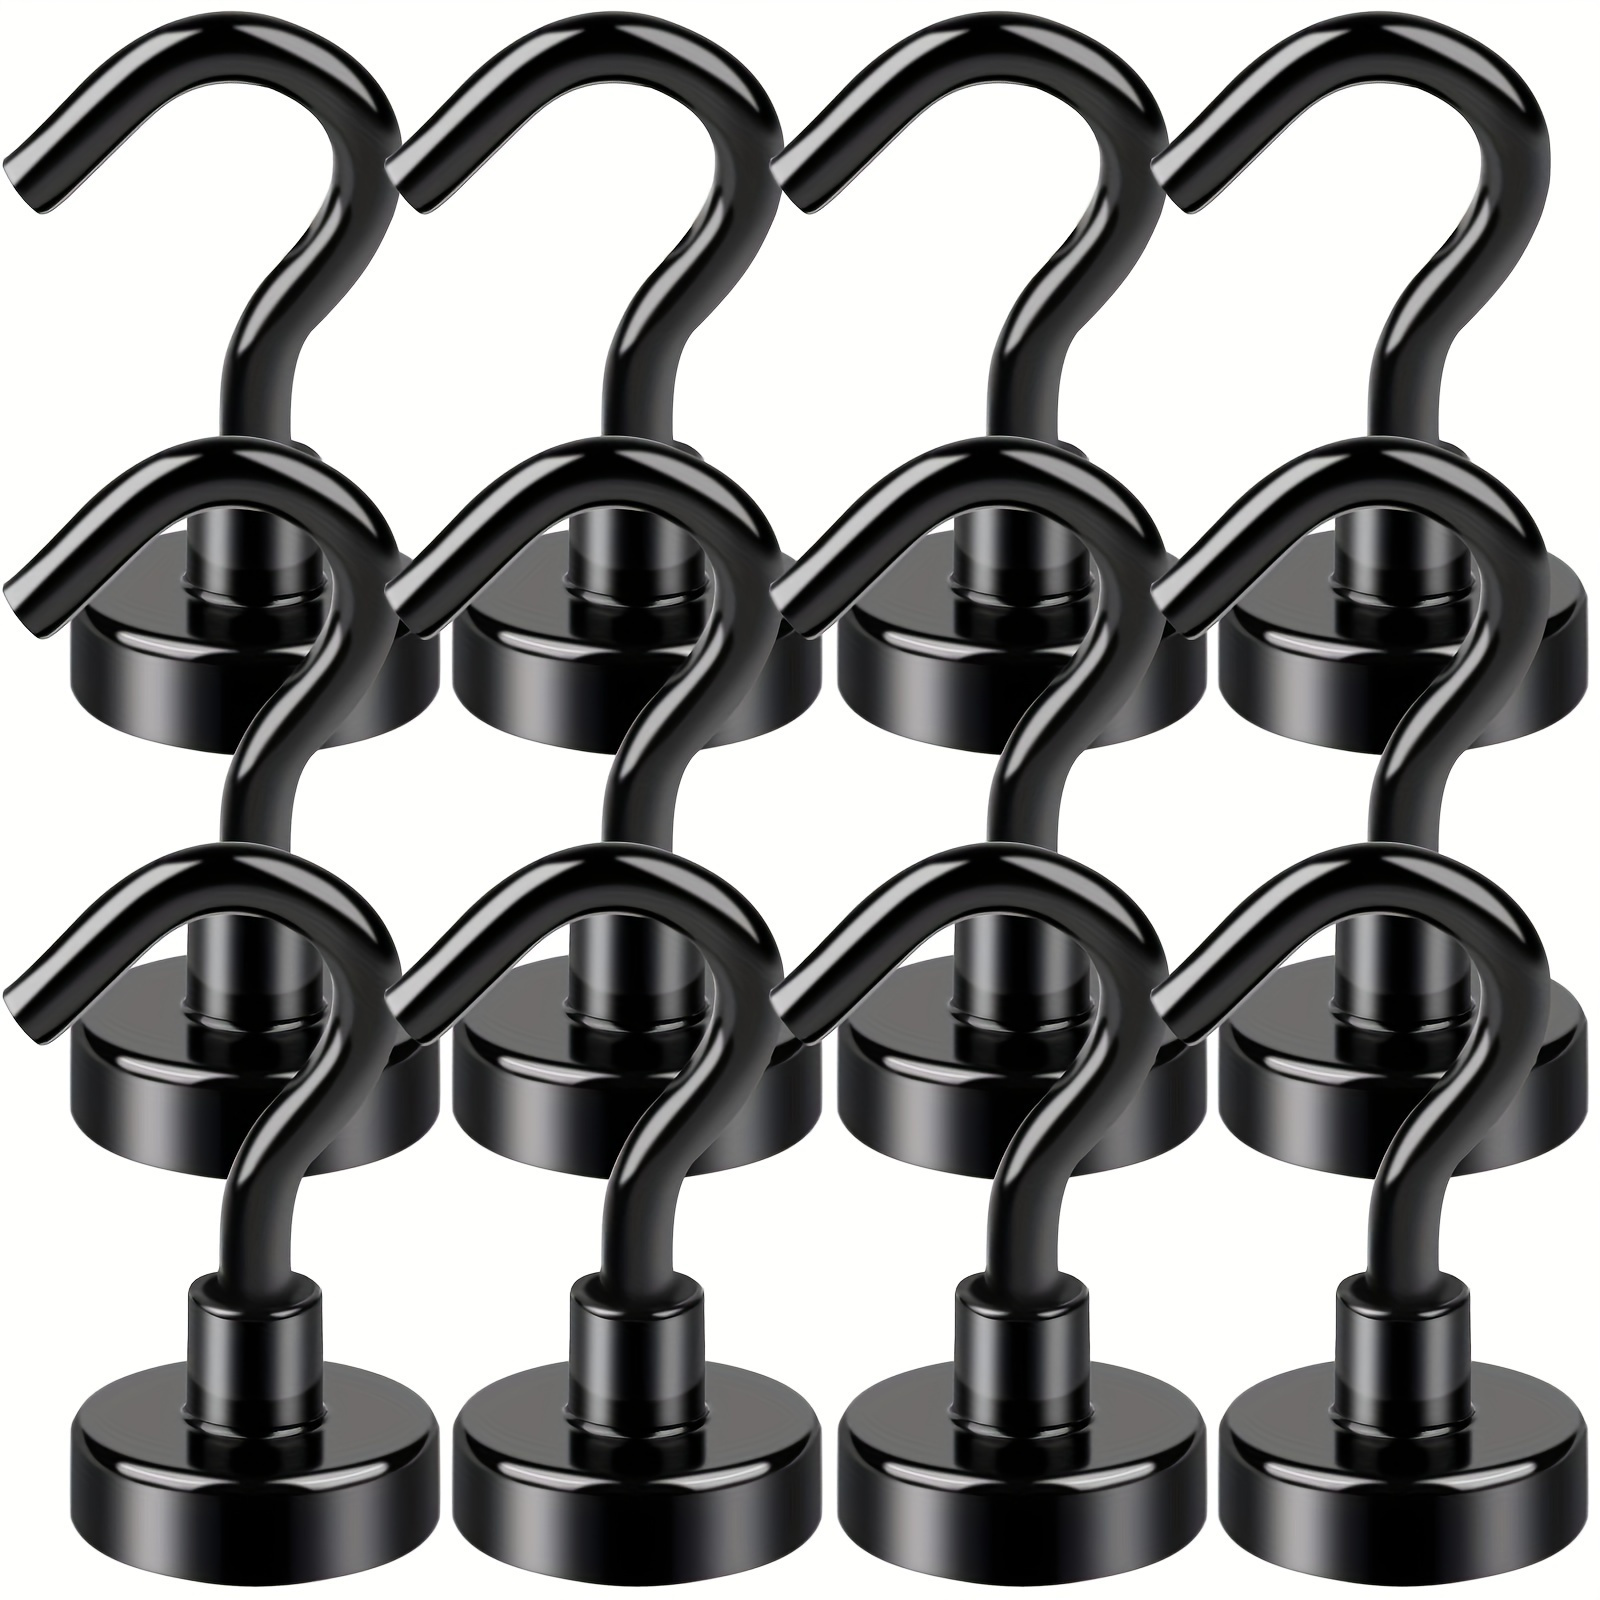 

8/12pcs Black Magnetic Hooks, 25lbs Strong Magnetic Hooks Heavy Duty With Epoxy Coating For Refrigerator, Magnetic Cruise Hooks For Hanging, Office, And Kitchen